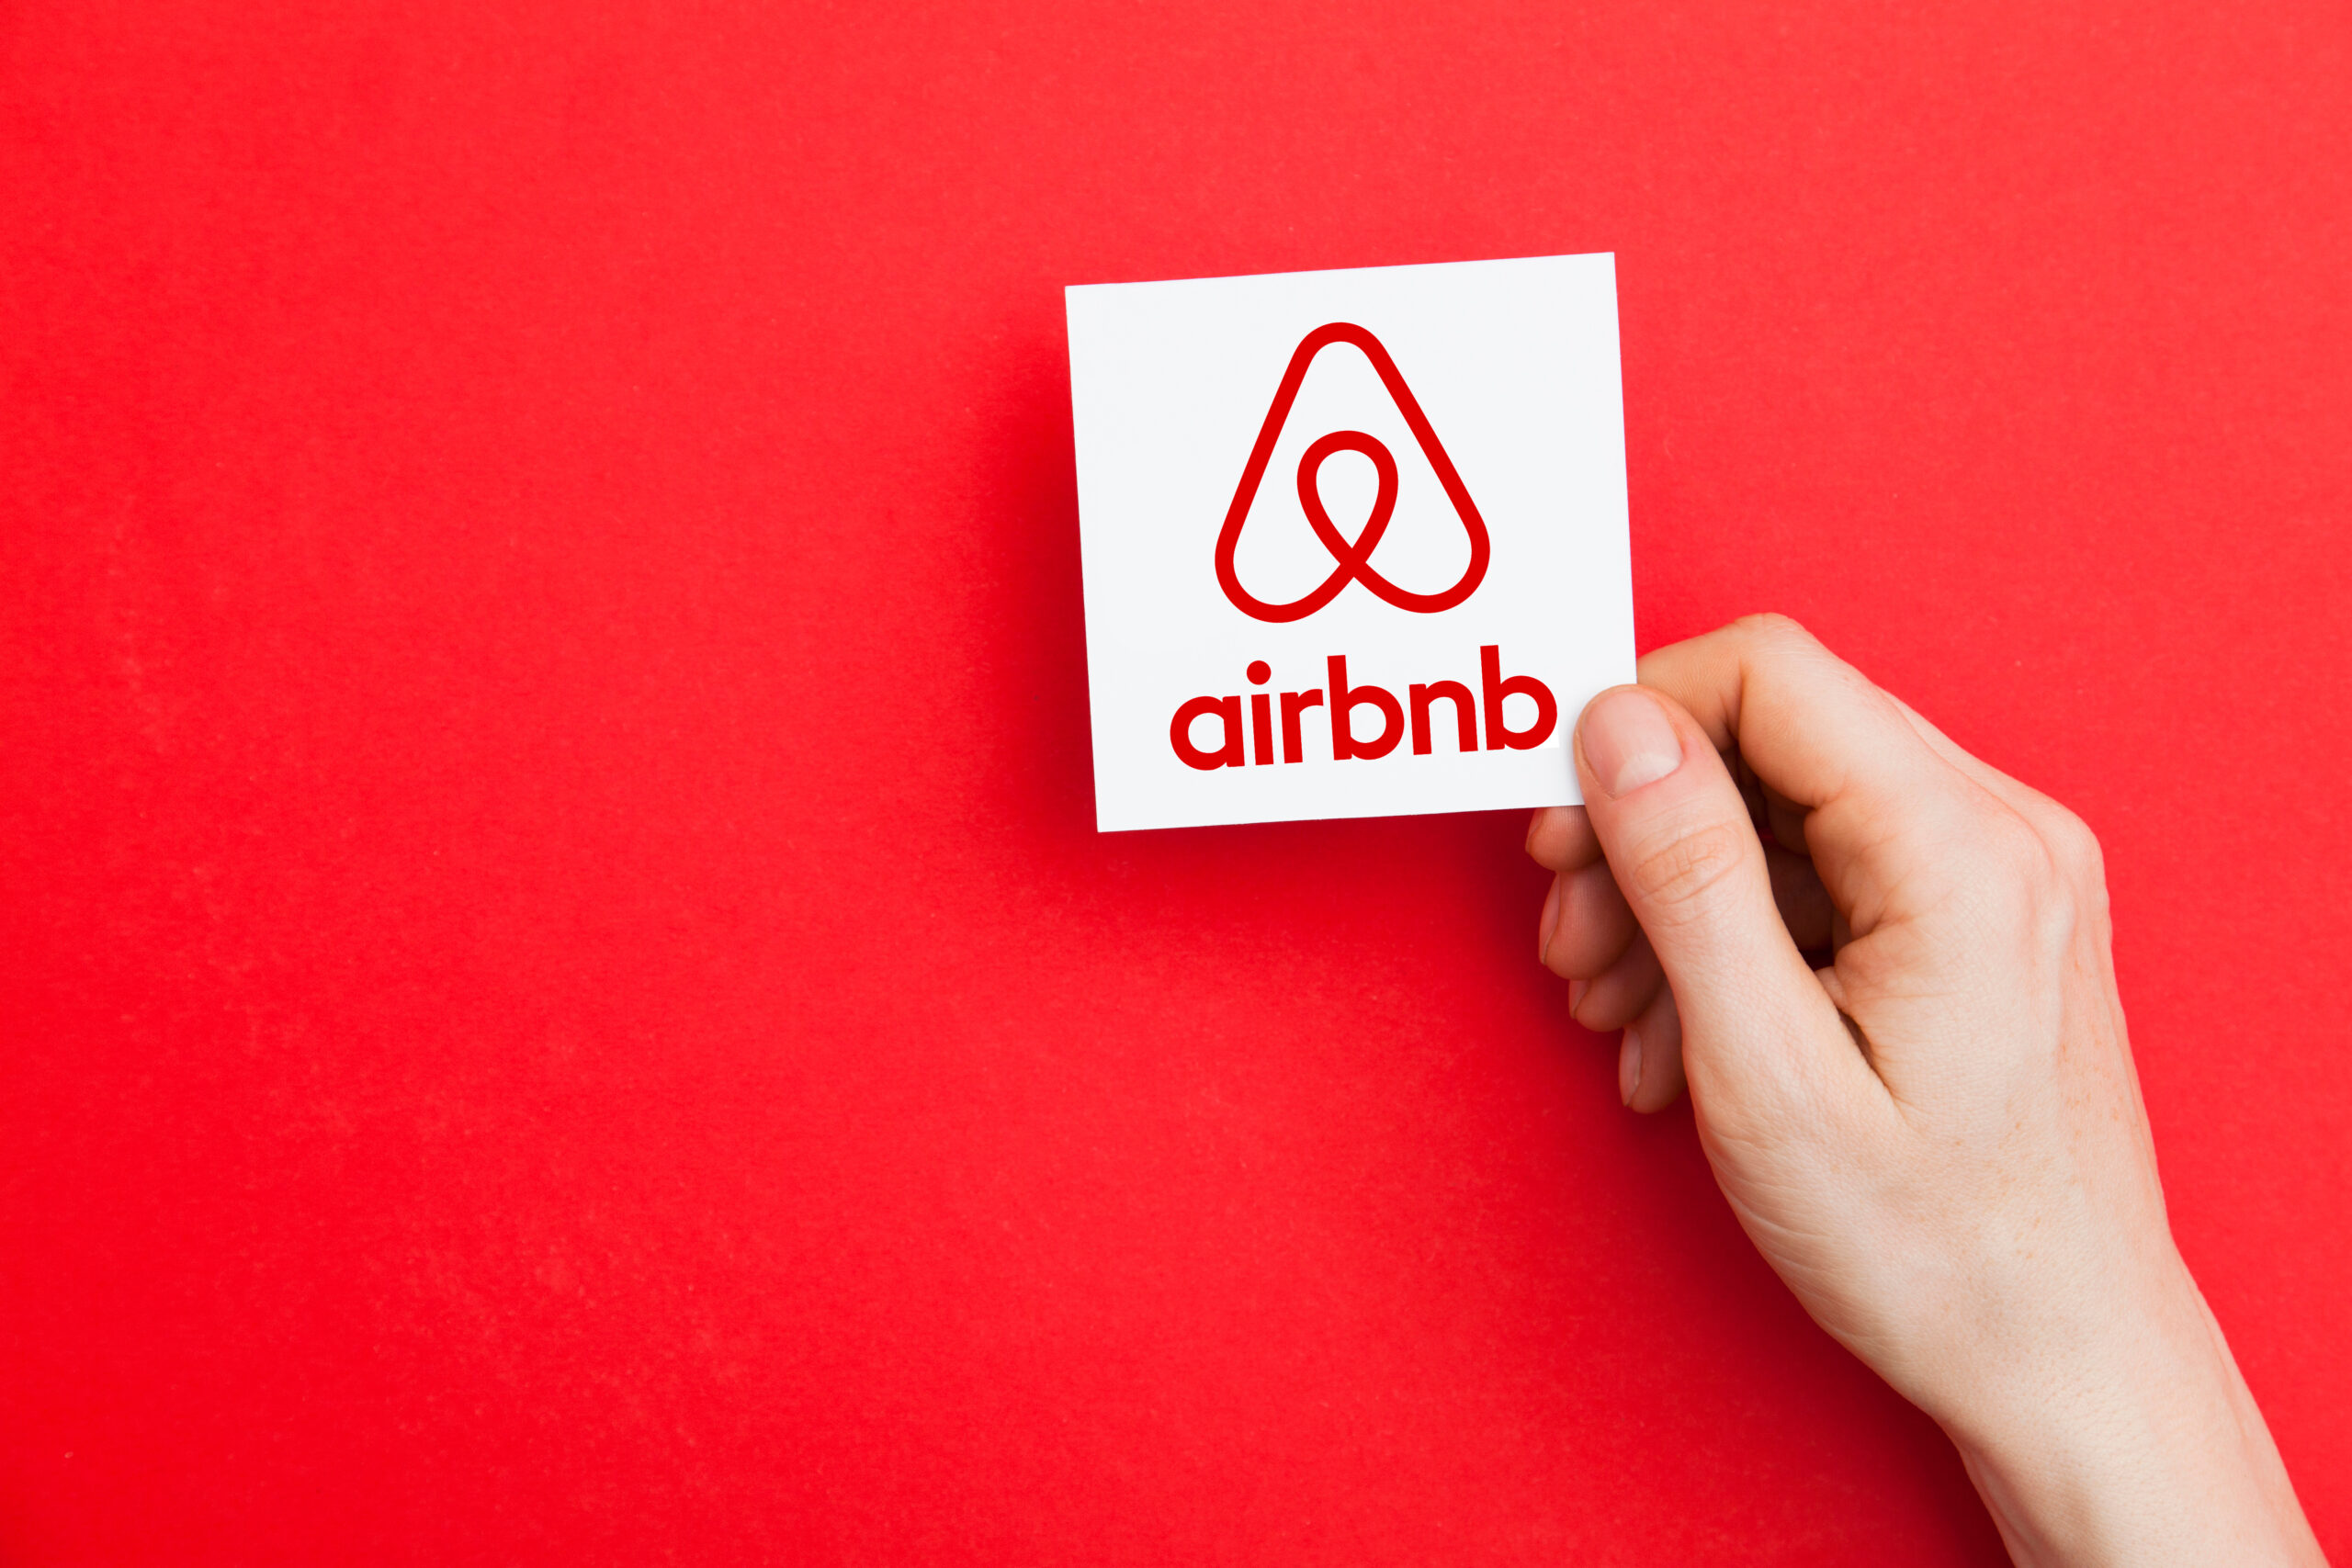 LONDON, UK - May 7th 2017: Hand holding Airbnb logo. Airbnb is a